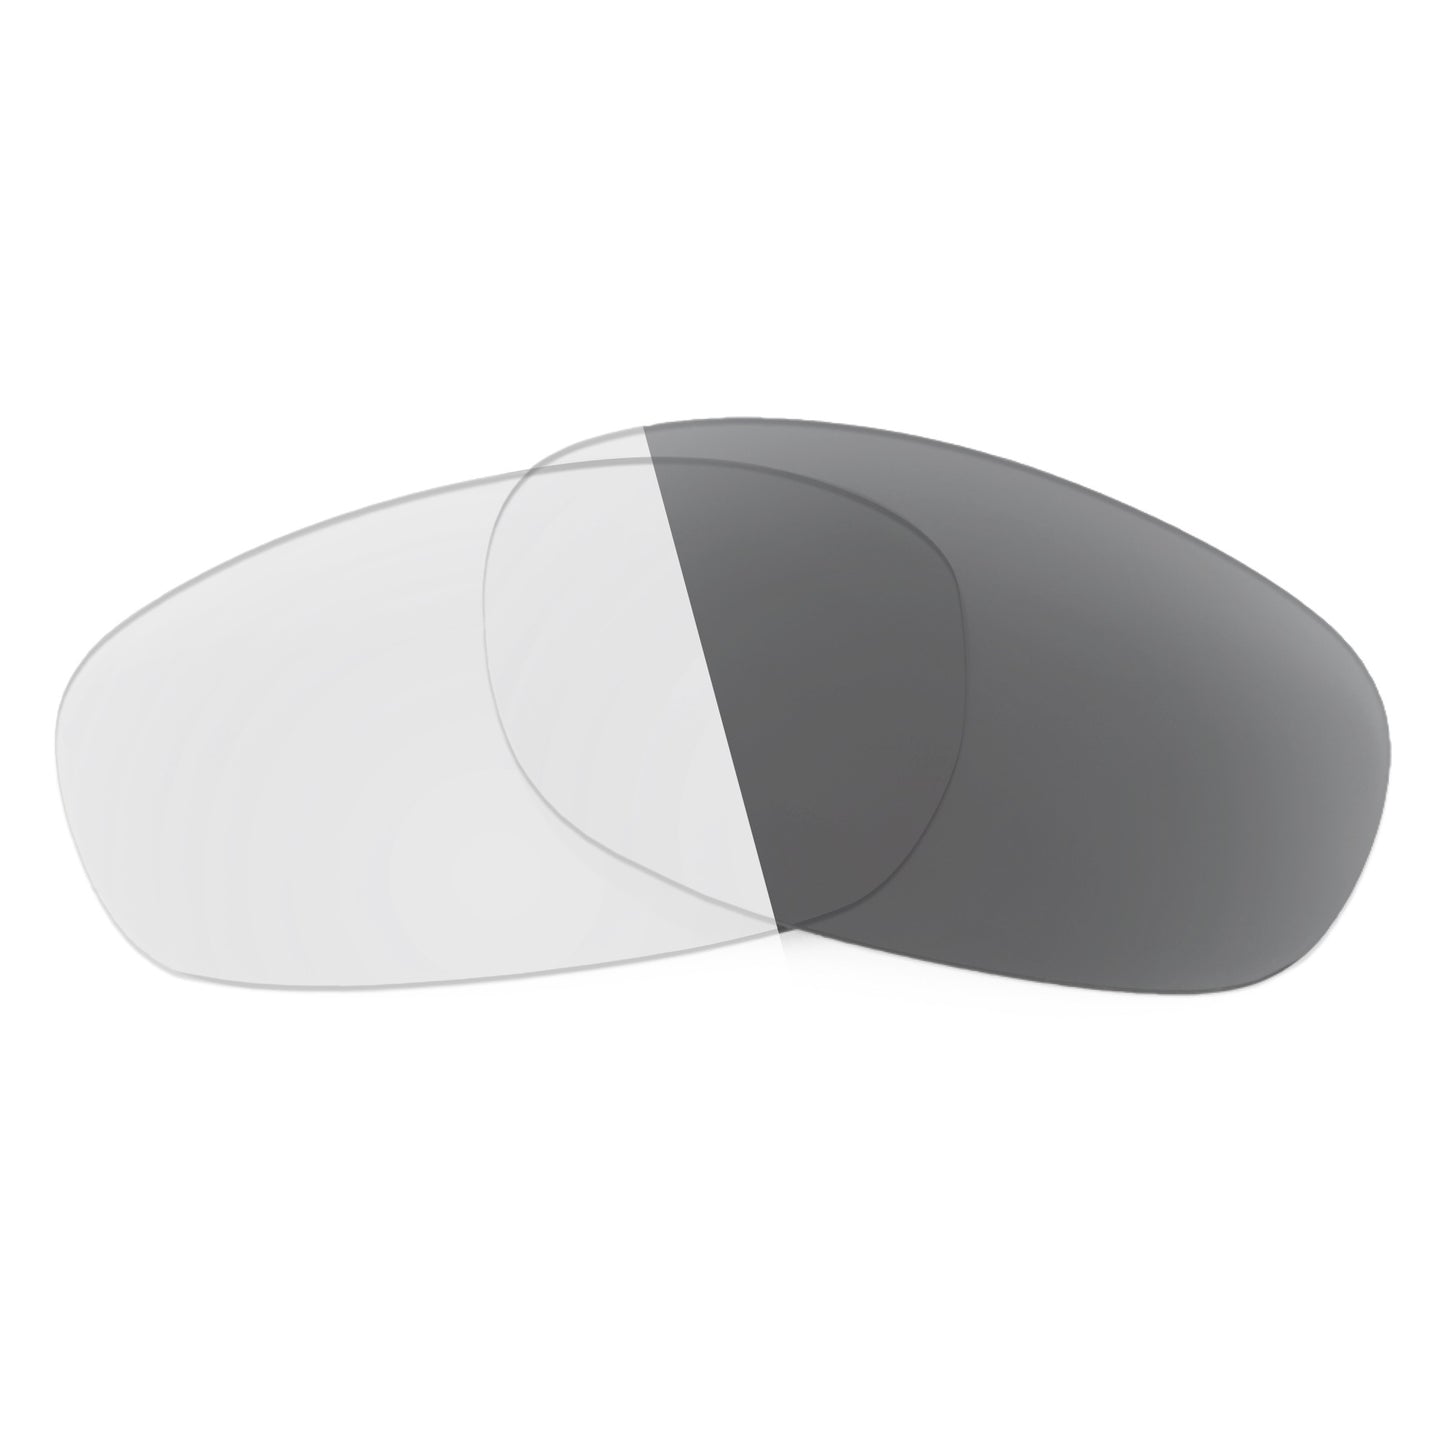 Revant replacement lenses for Wiley X Glory Non-Polarized Adapt Gray Photochromic